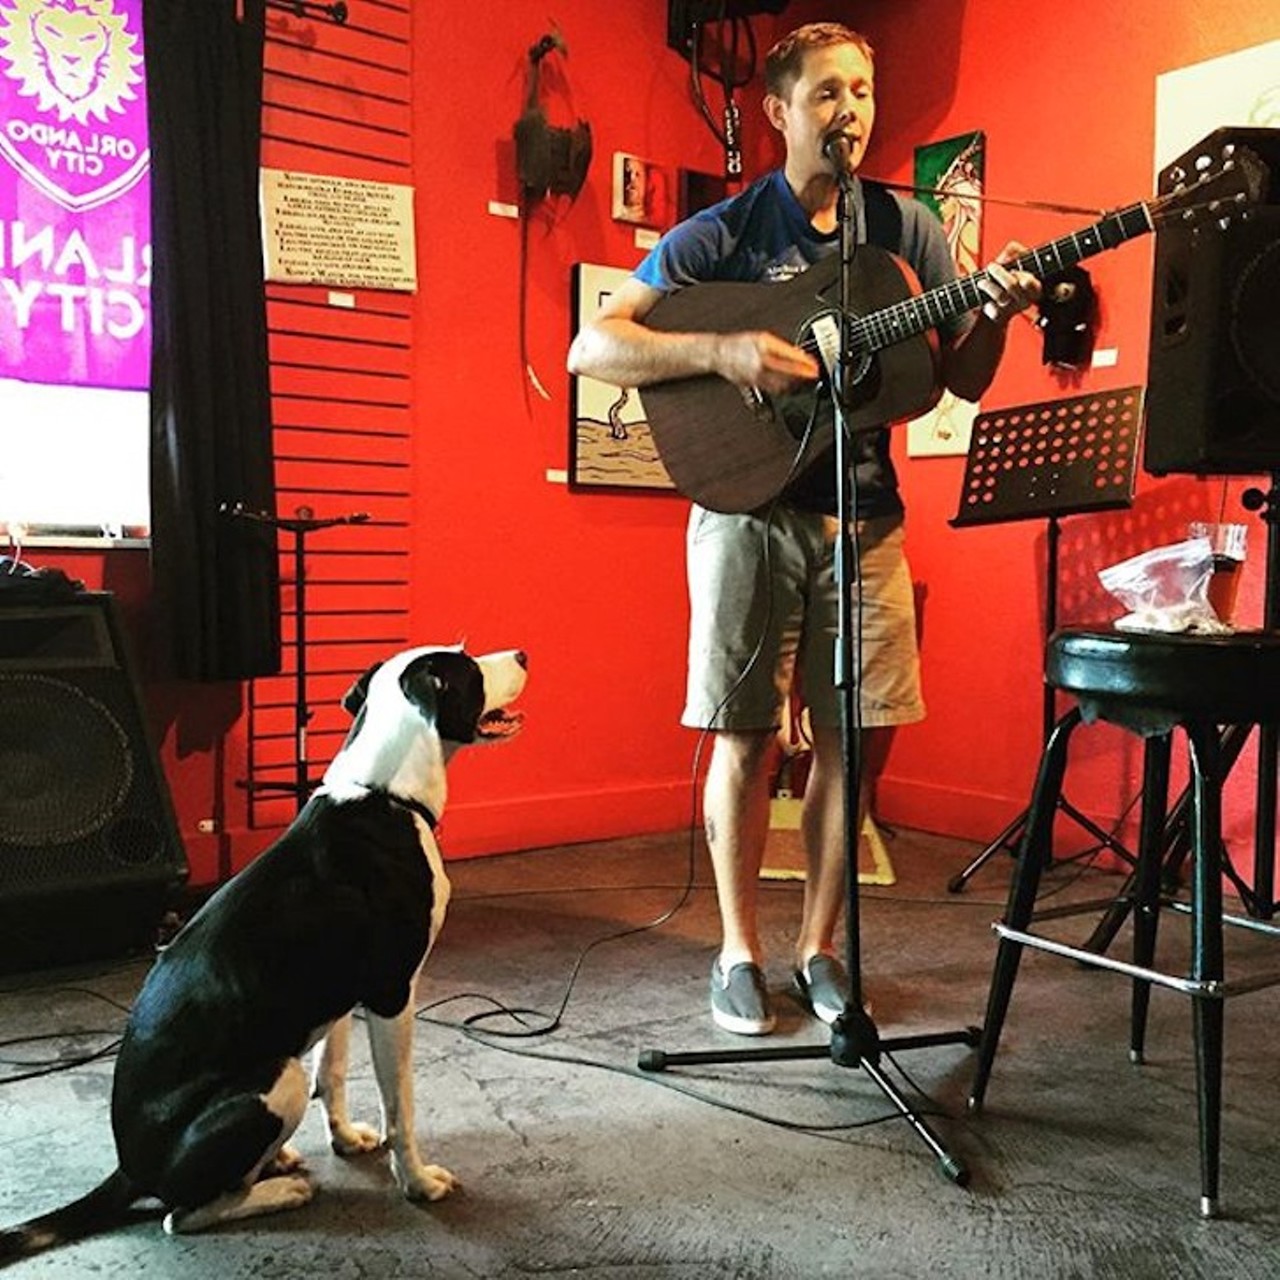 The Falcon
819 E. Washington St. | 407-423-3060
Here, you&#146;ll find finger and paw lickin' grub, plus plenty of art shows, musicians and watch parties for you and your pup to enjoy. 
Photo via thefalconbar/Instagram